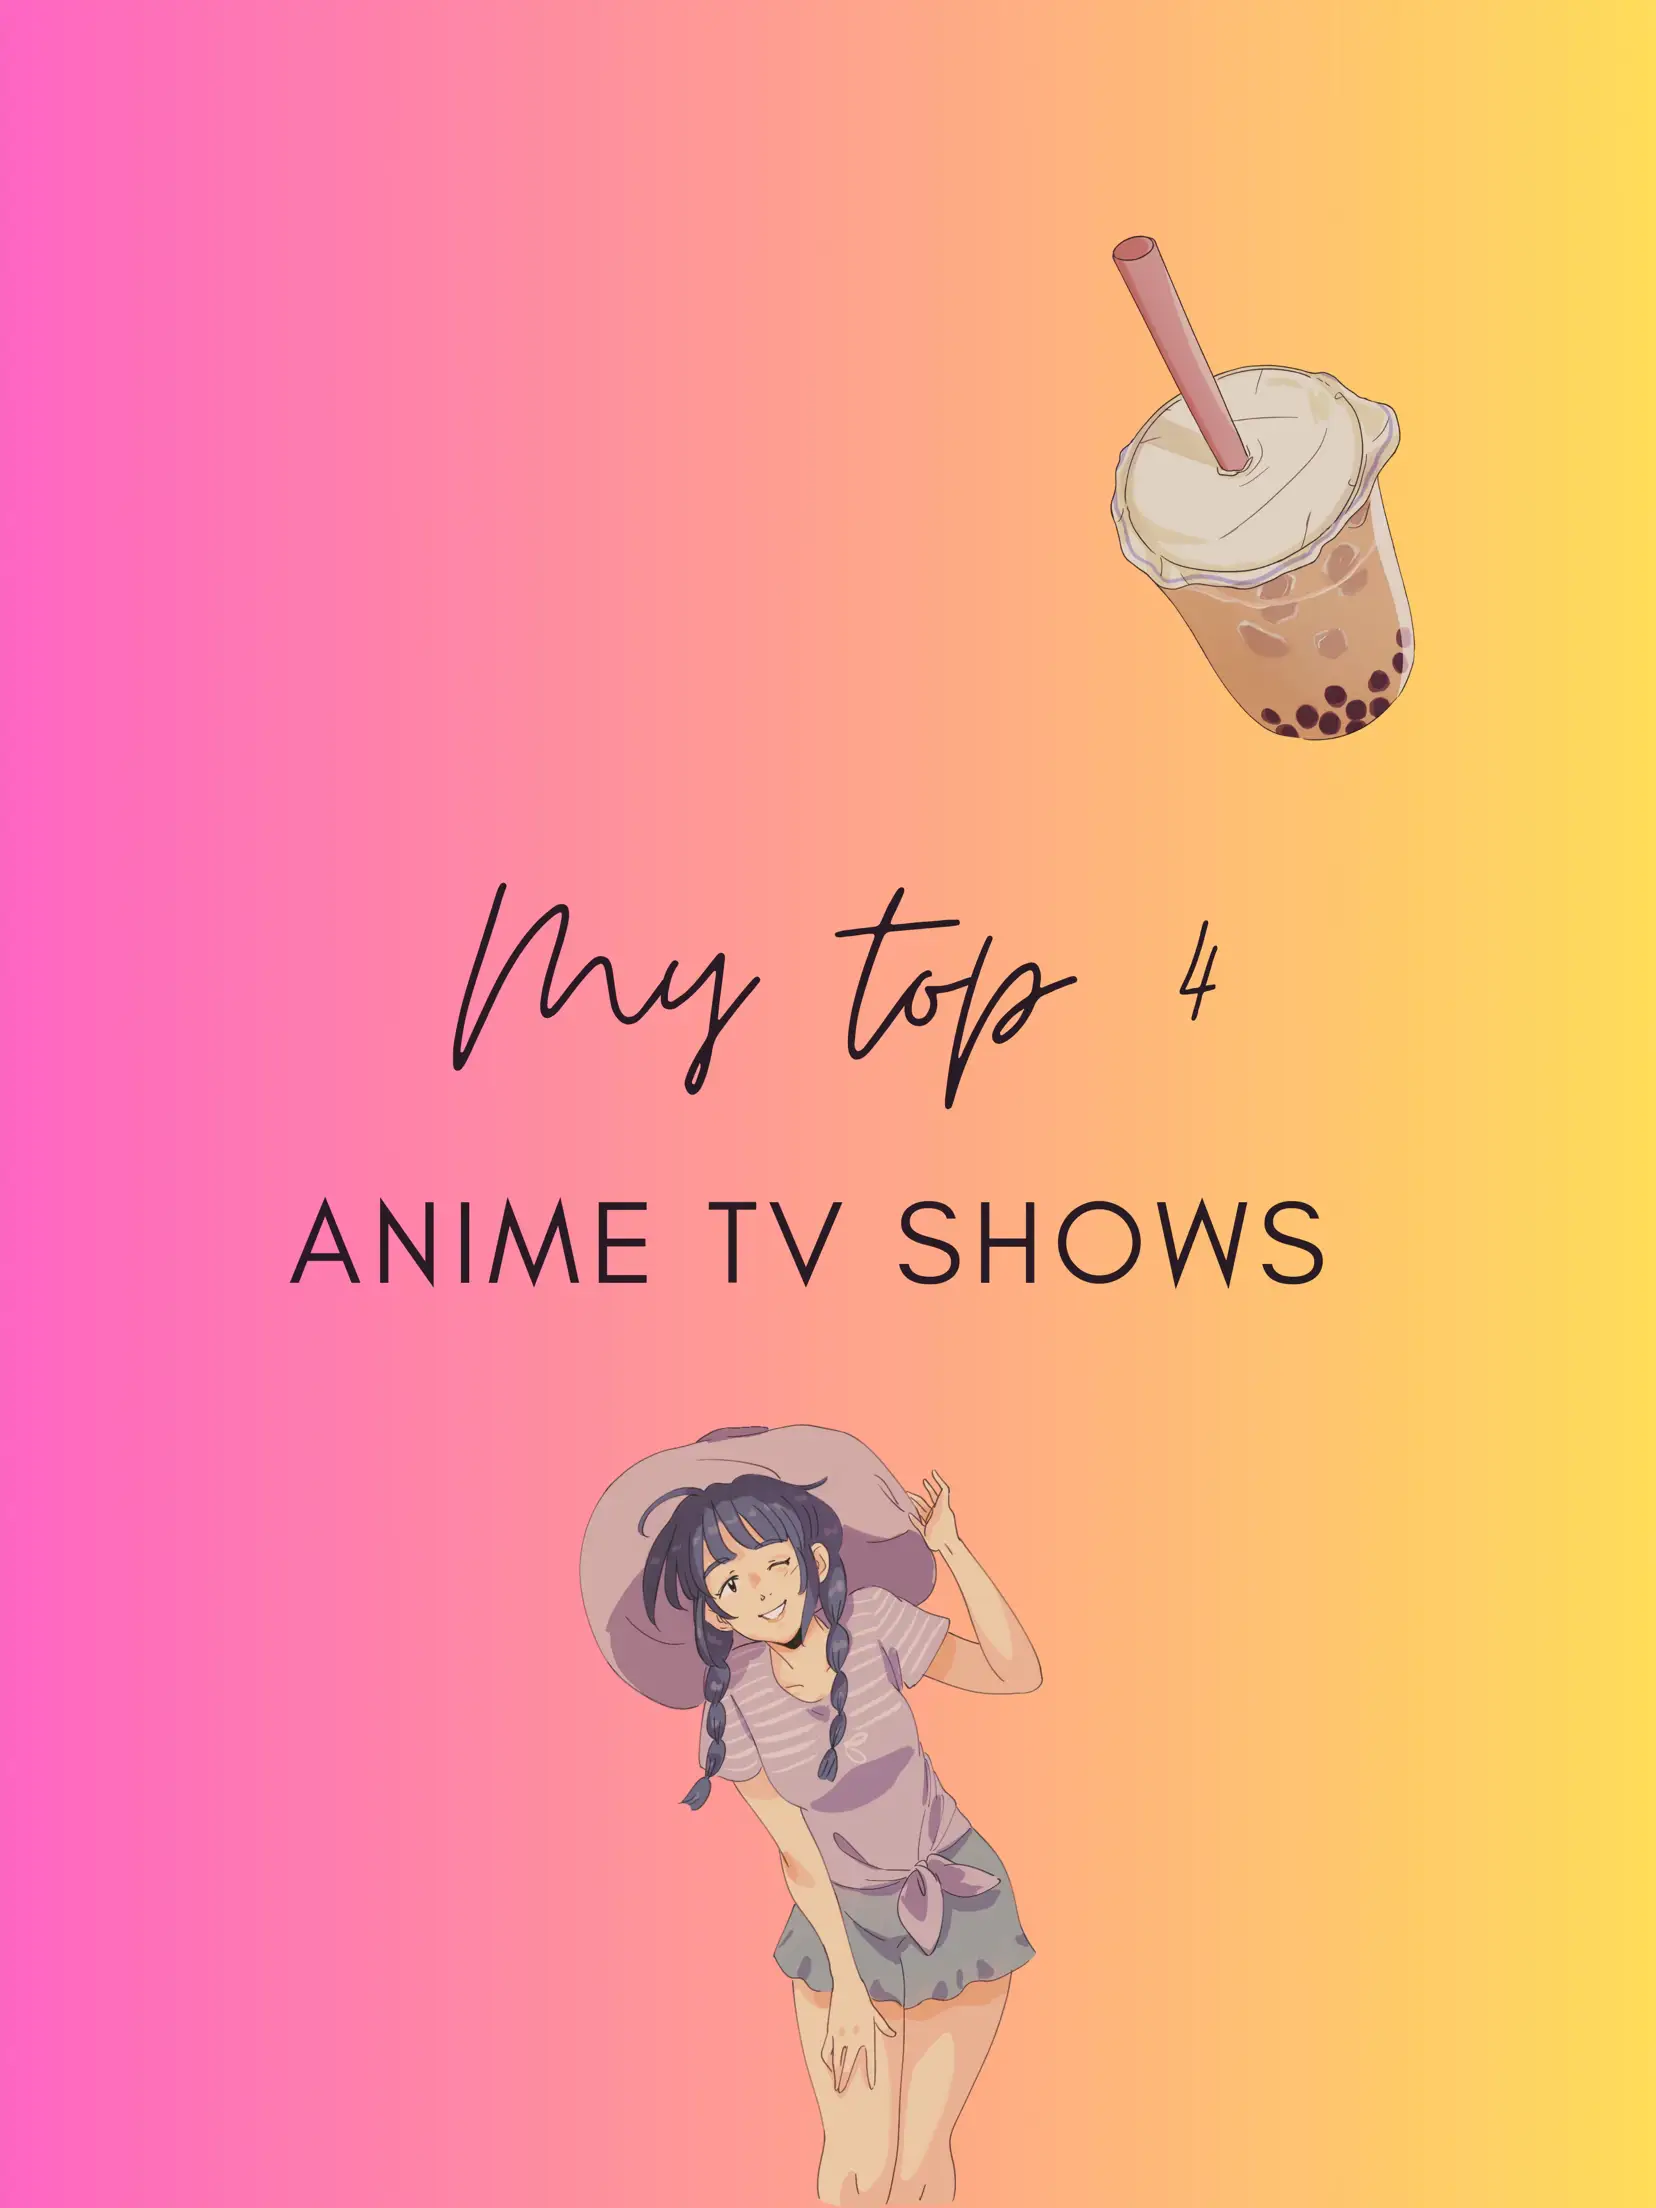 How to Watch 4Anime on PCs, Mobile Devices, and Smart TVs?